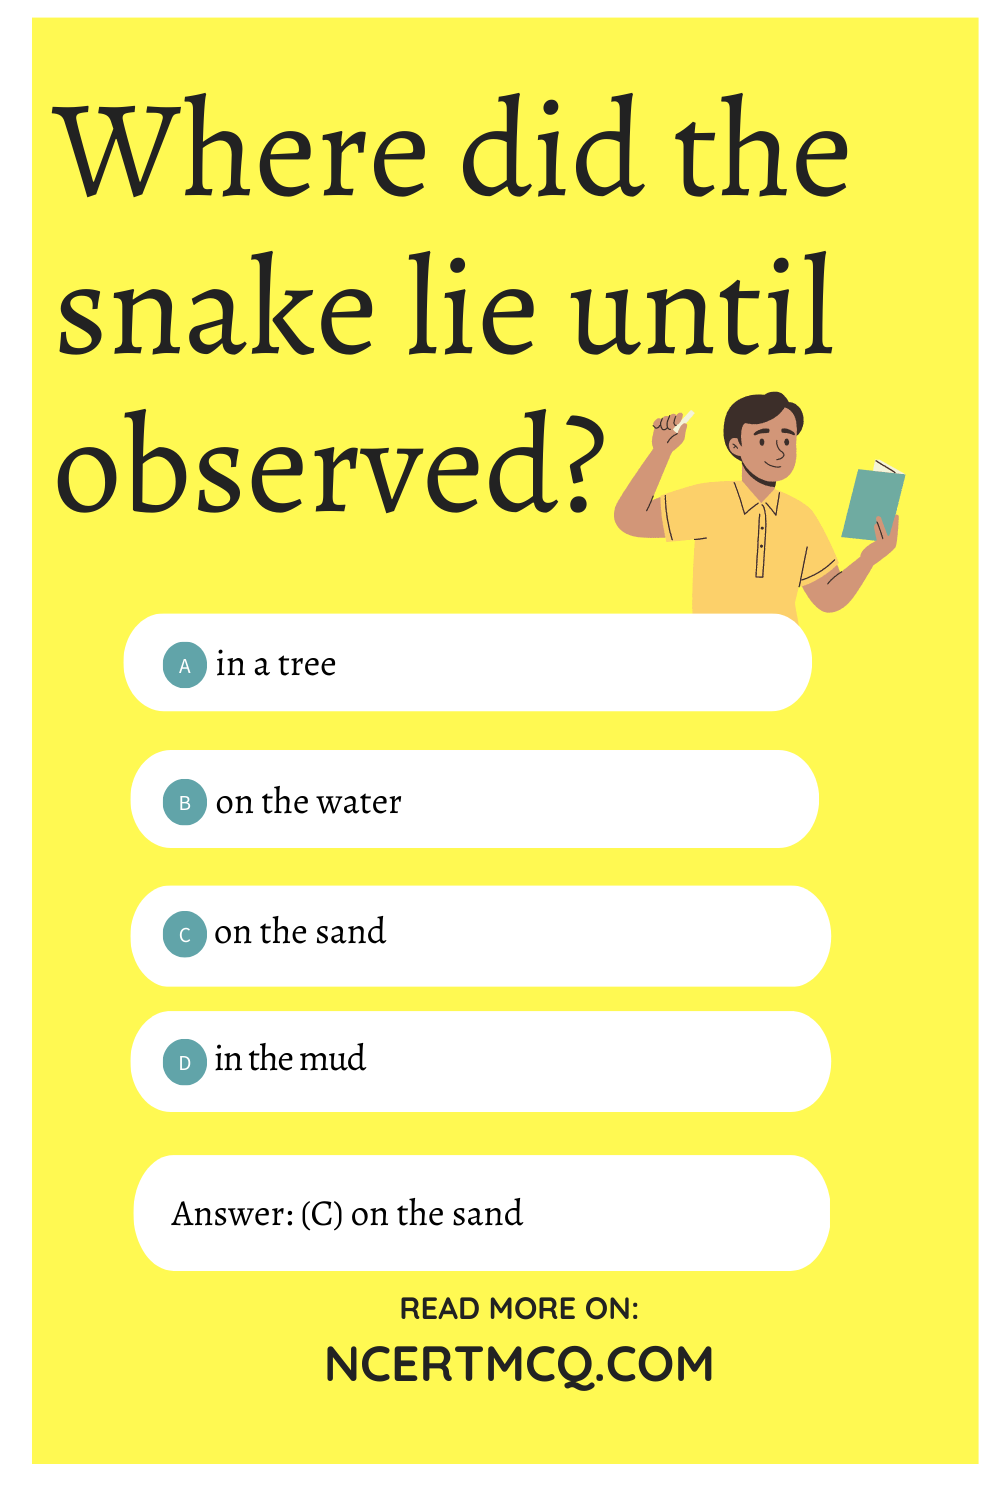 Where did the snake lie until observed?